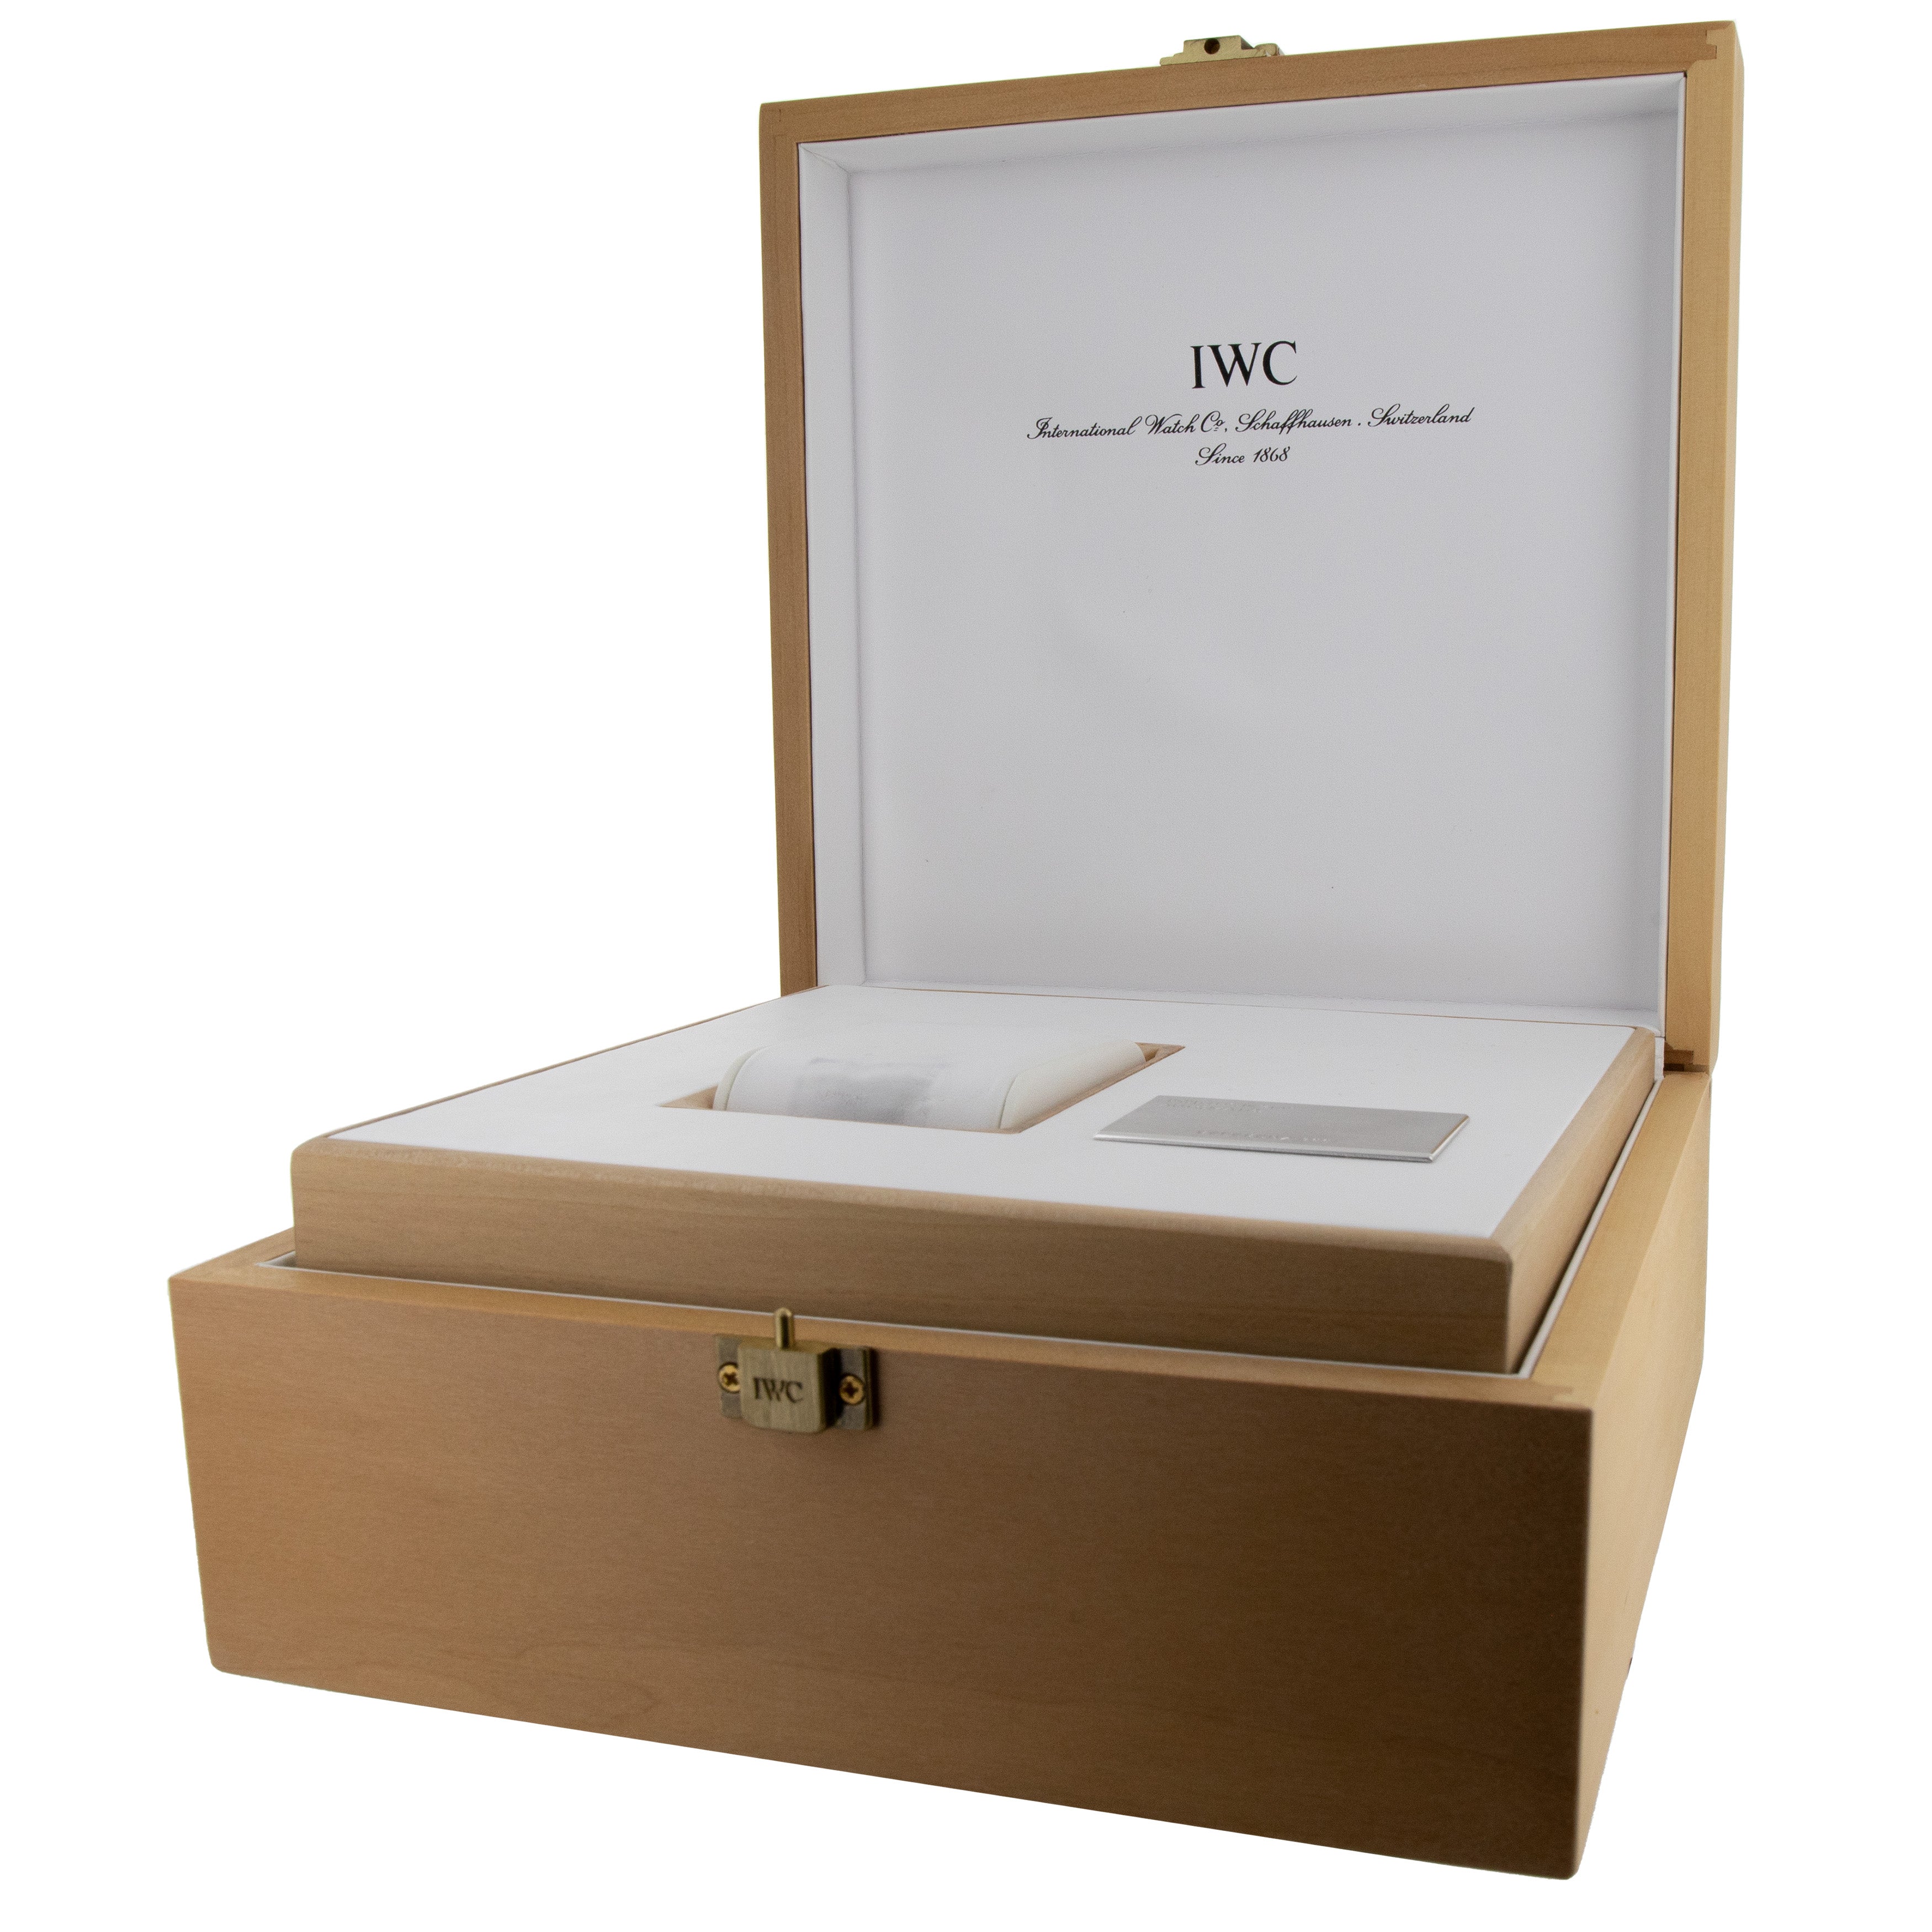 IWC Portugieser Automatic Stainless Steel Black Dial 42mm IW500109 Full Set